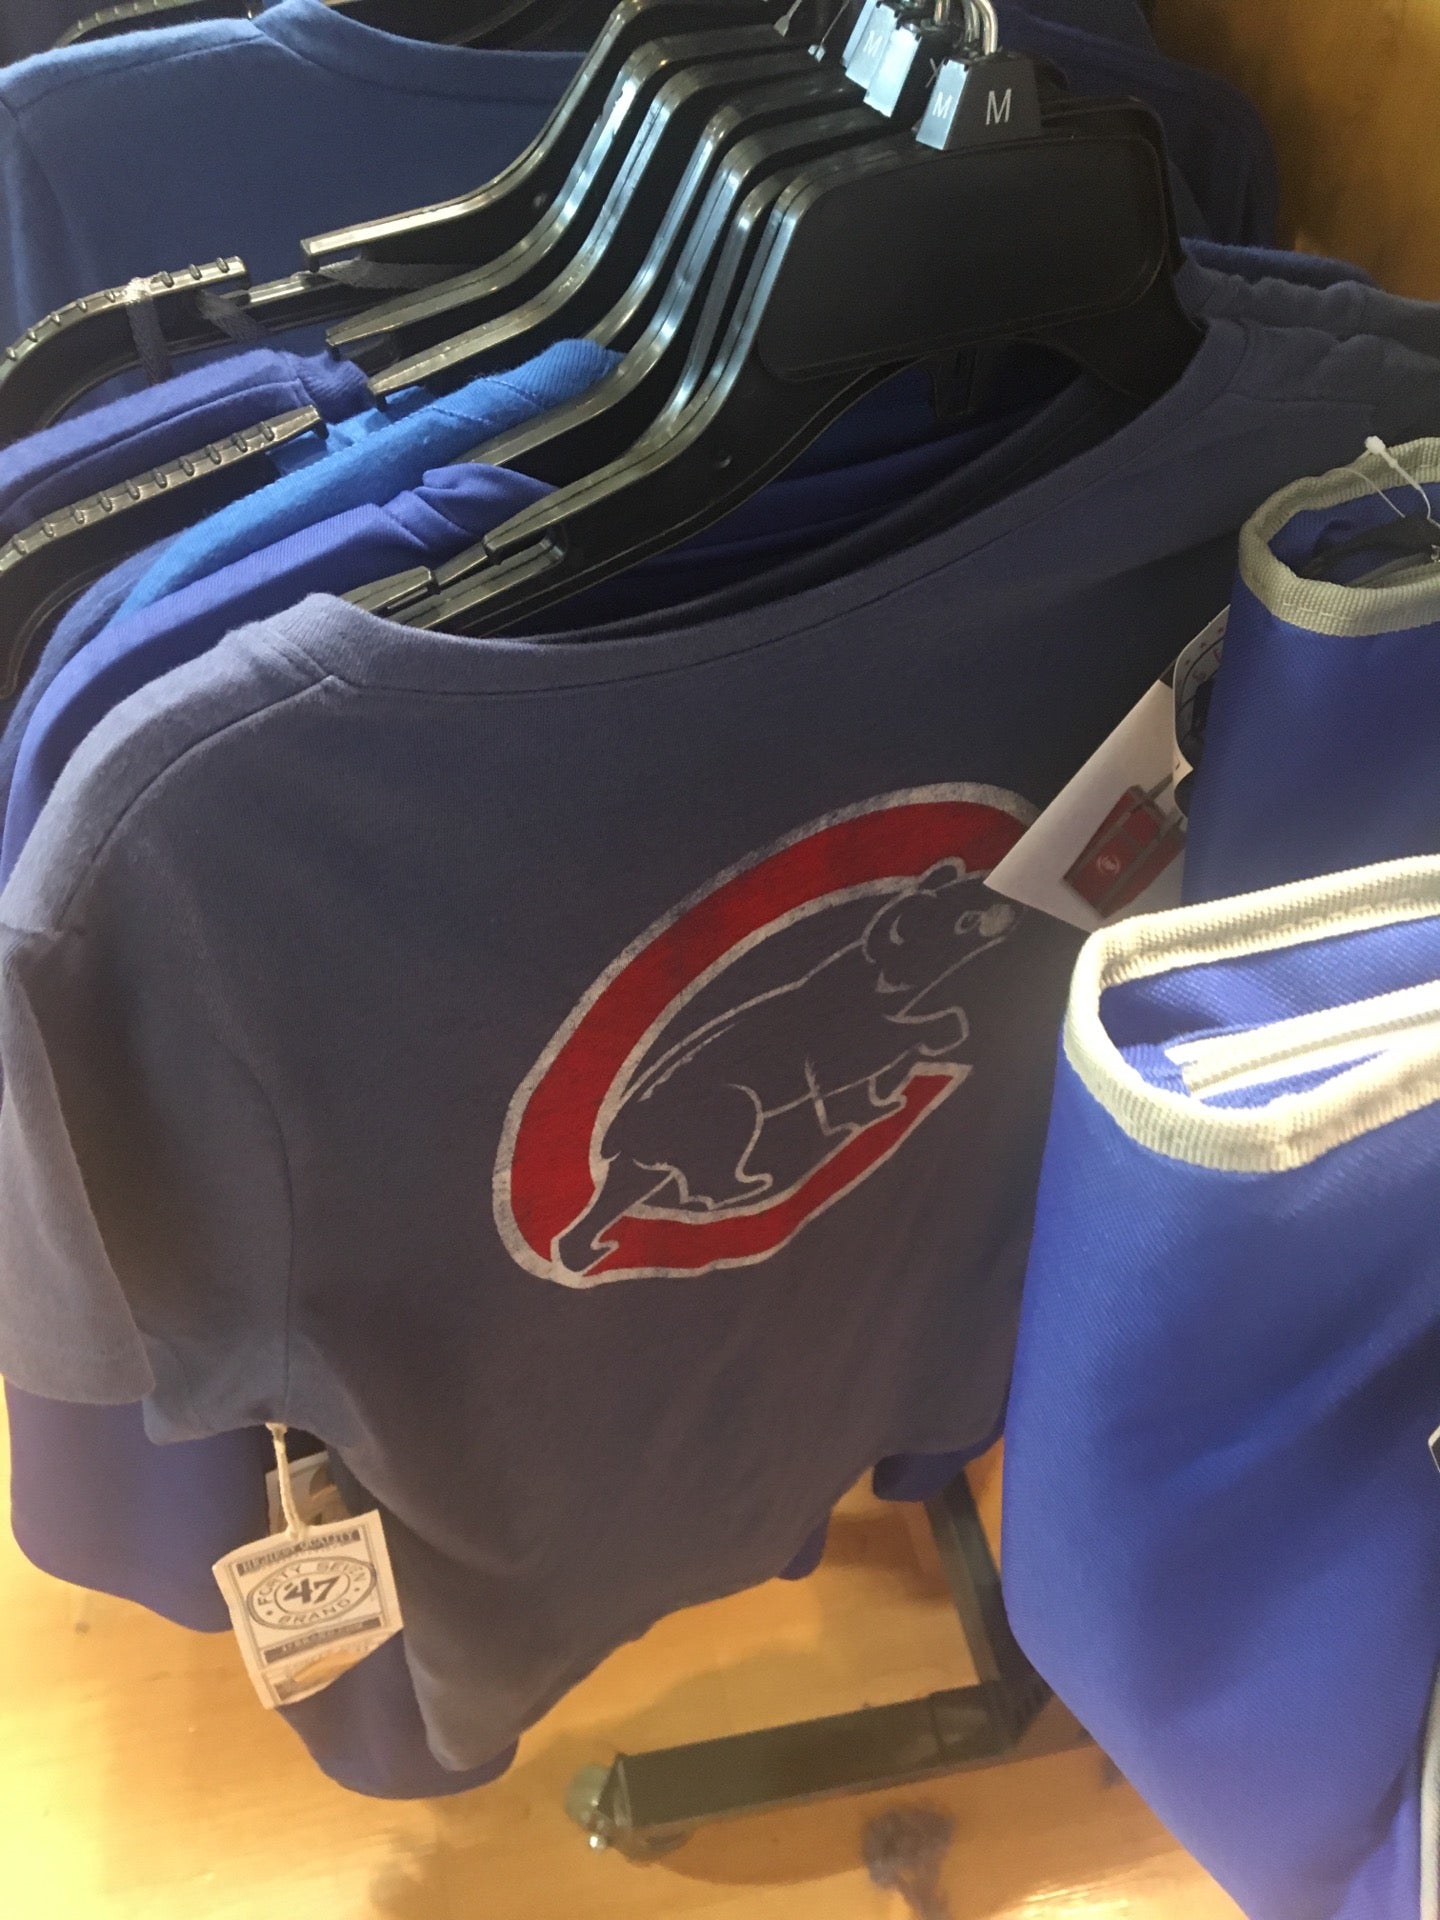 Chicago Cubs Women's Apparel  Curbside Pickup Available at DICK'S